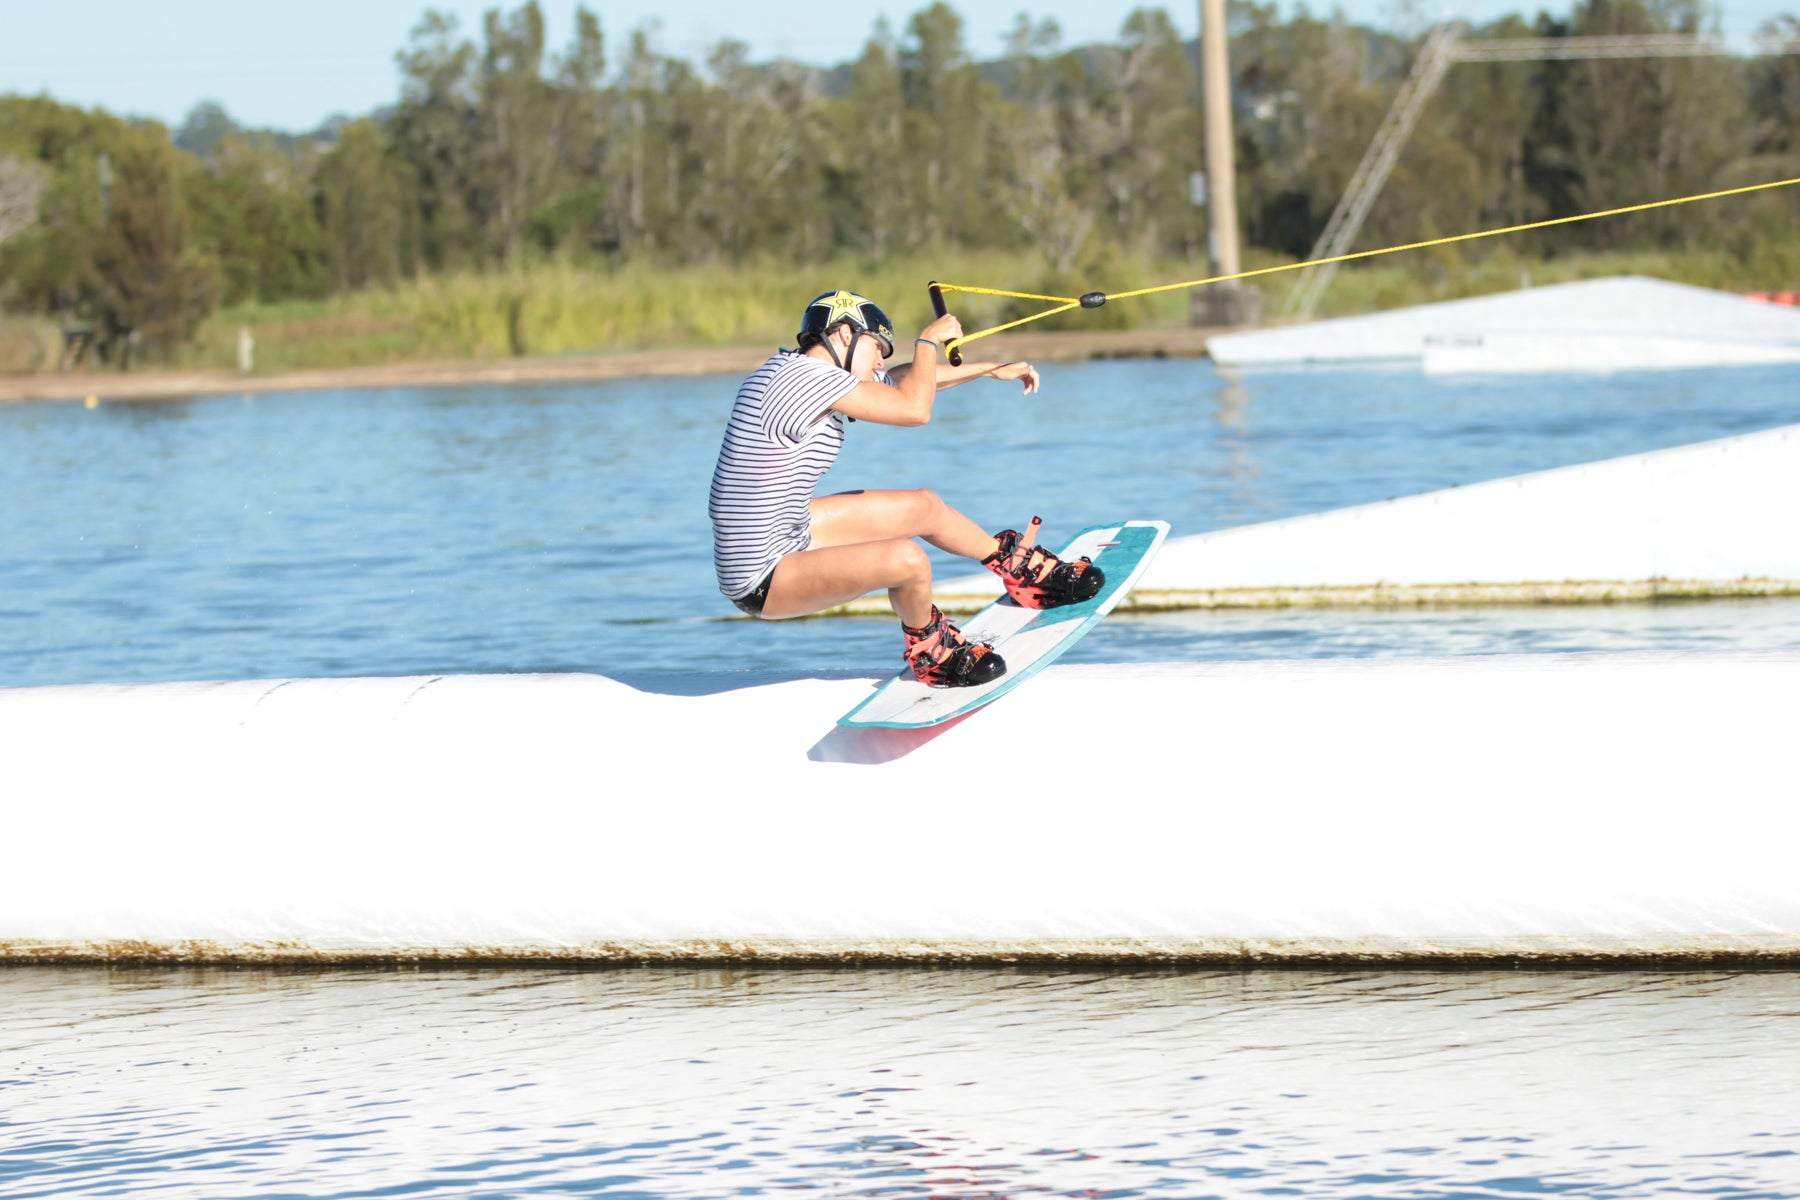 New Features for the Wake Park